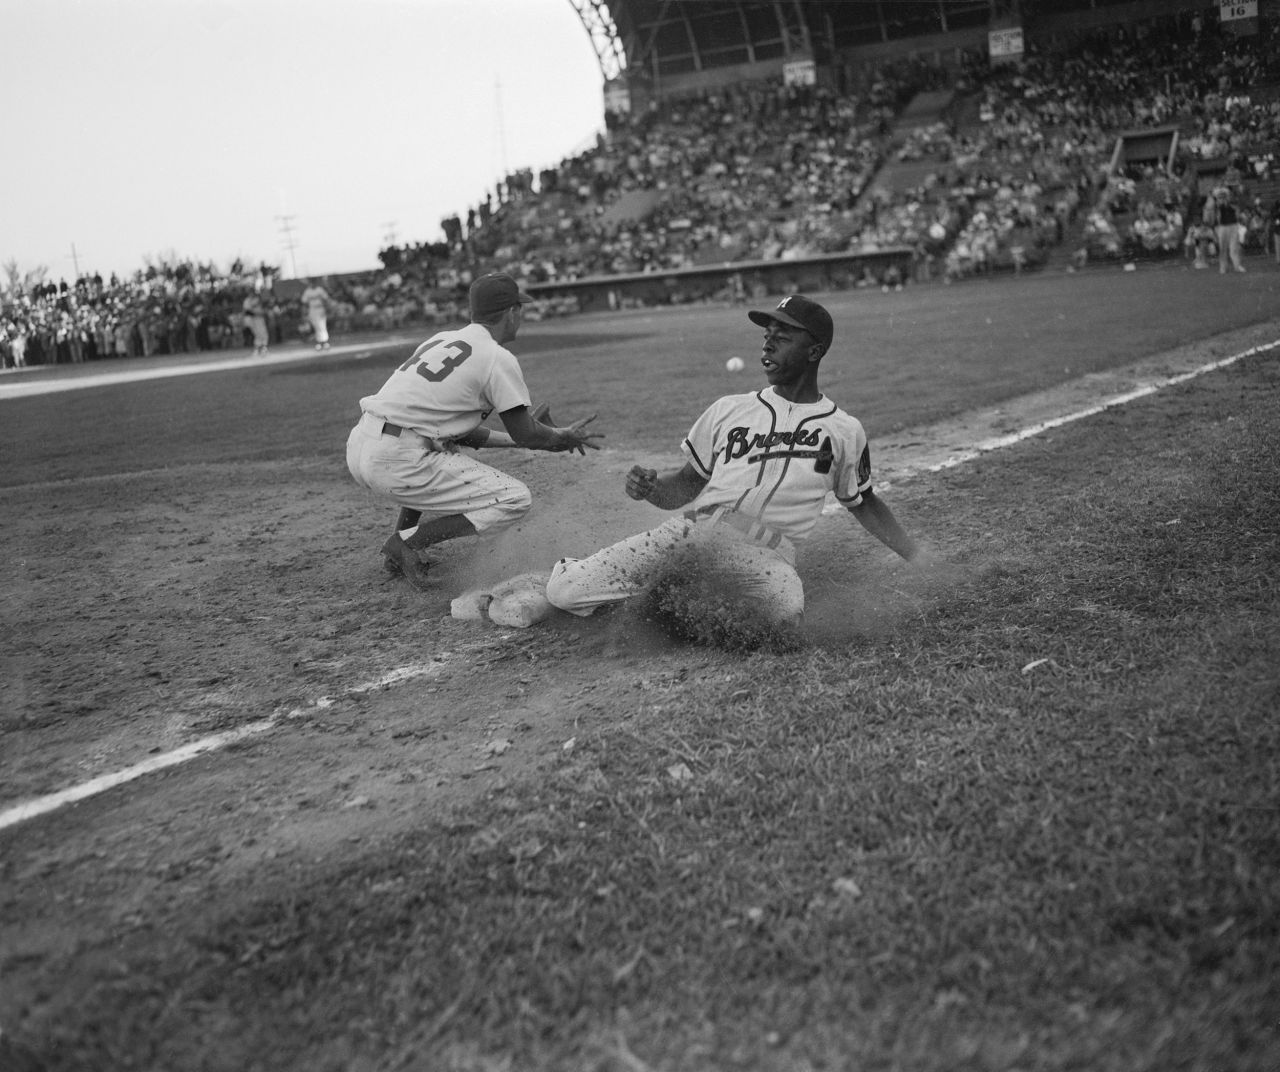 Aaron slides back to third base during an exhibition game in 1954. Aaron's career began in the Negro Leagues before he broke into the majors with the Milwaukee Braves.